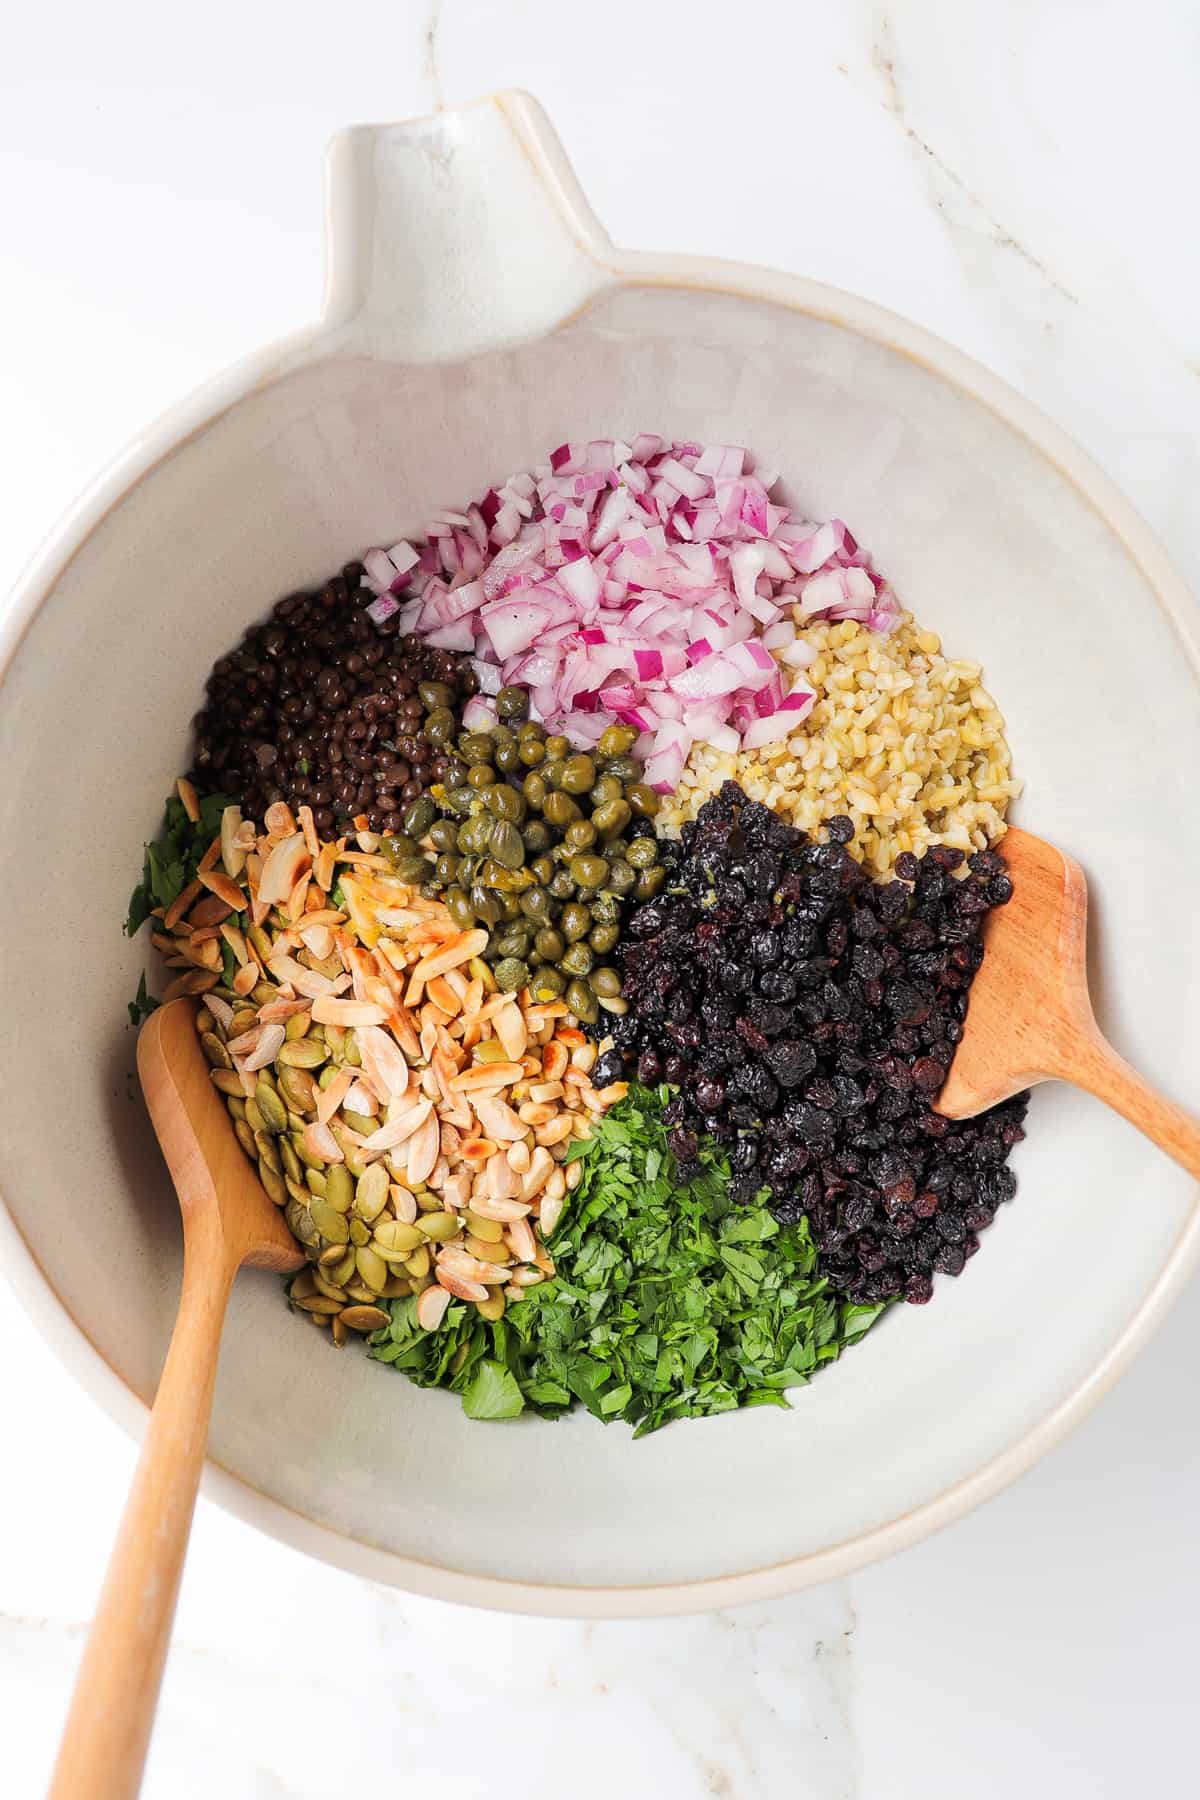 Grain salad ingredients in a mixing bowl with wooden spoons.